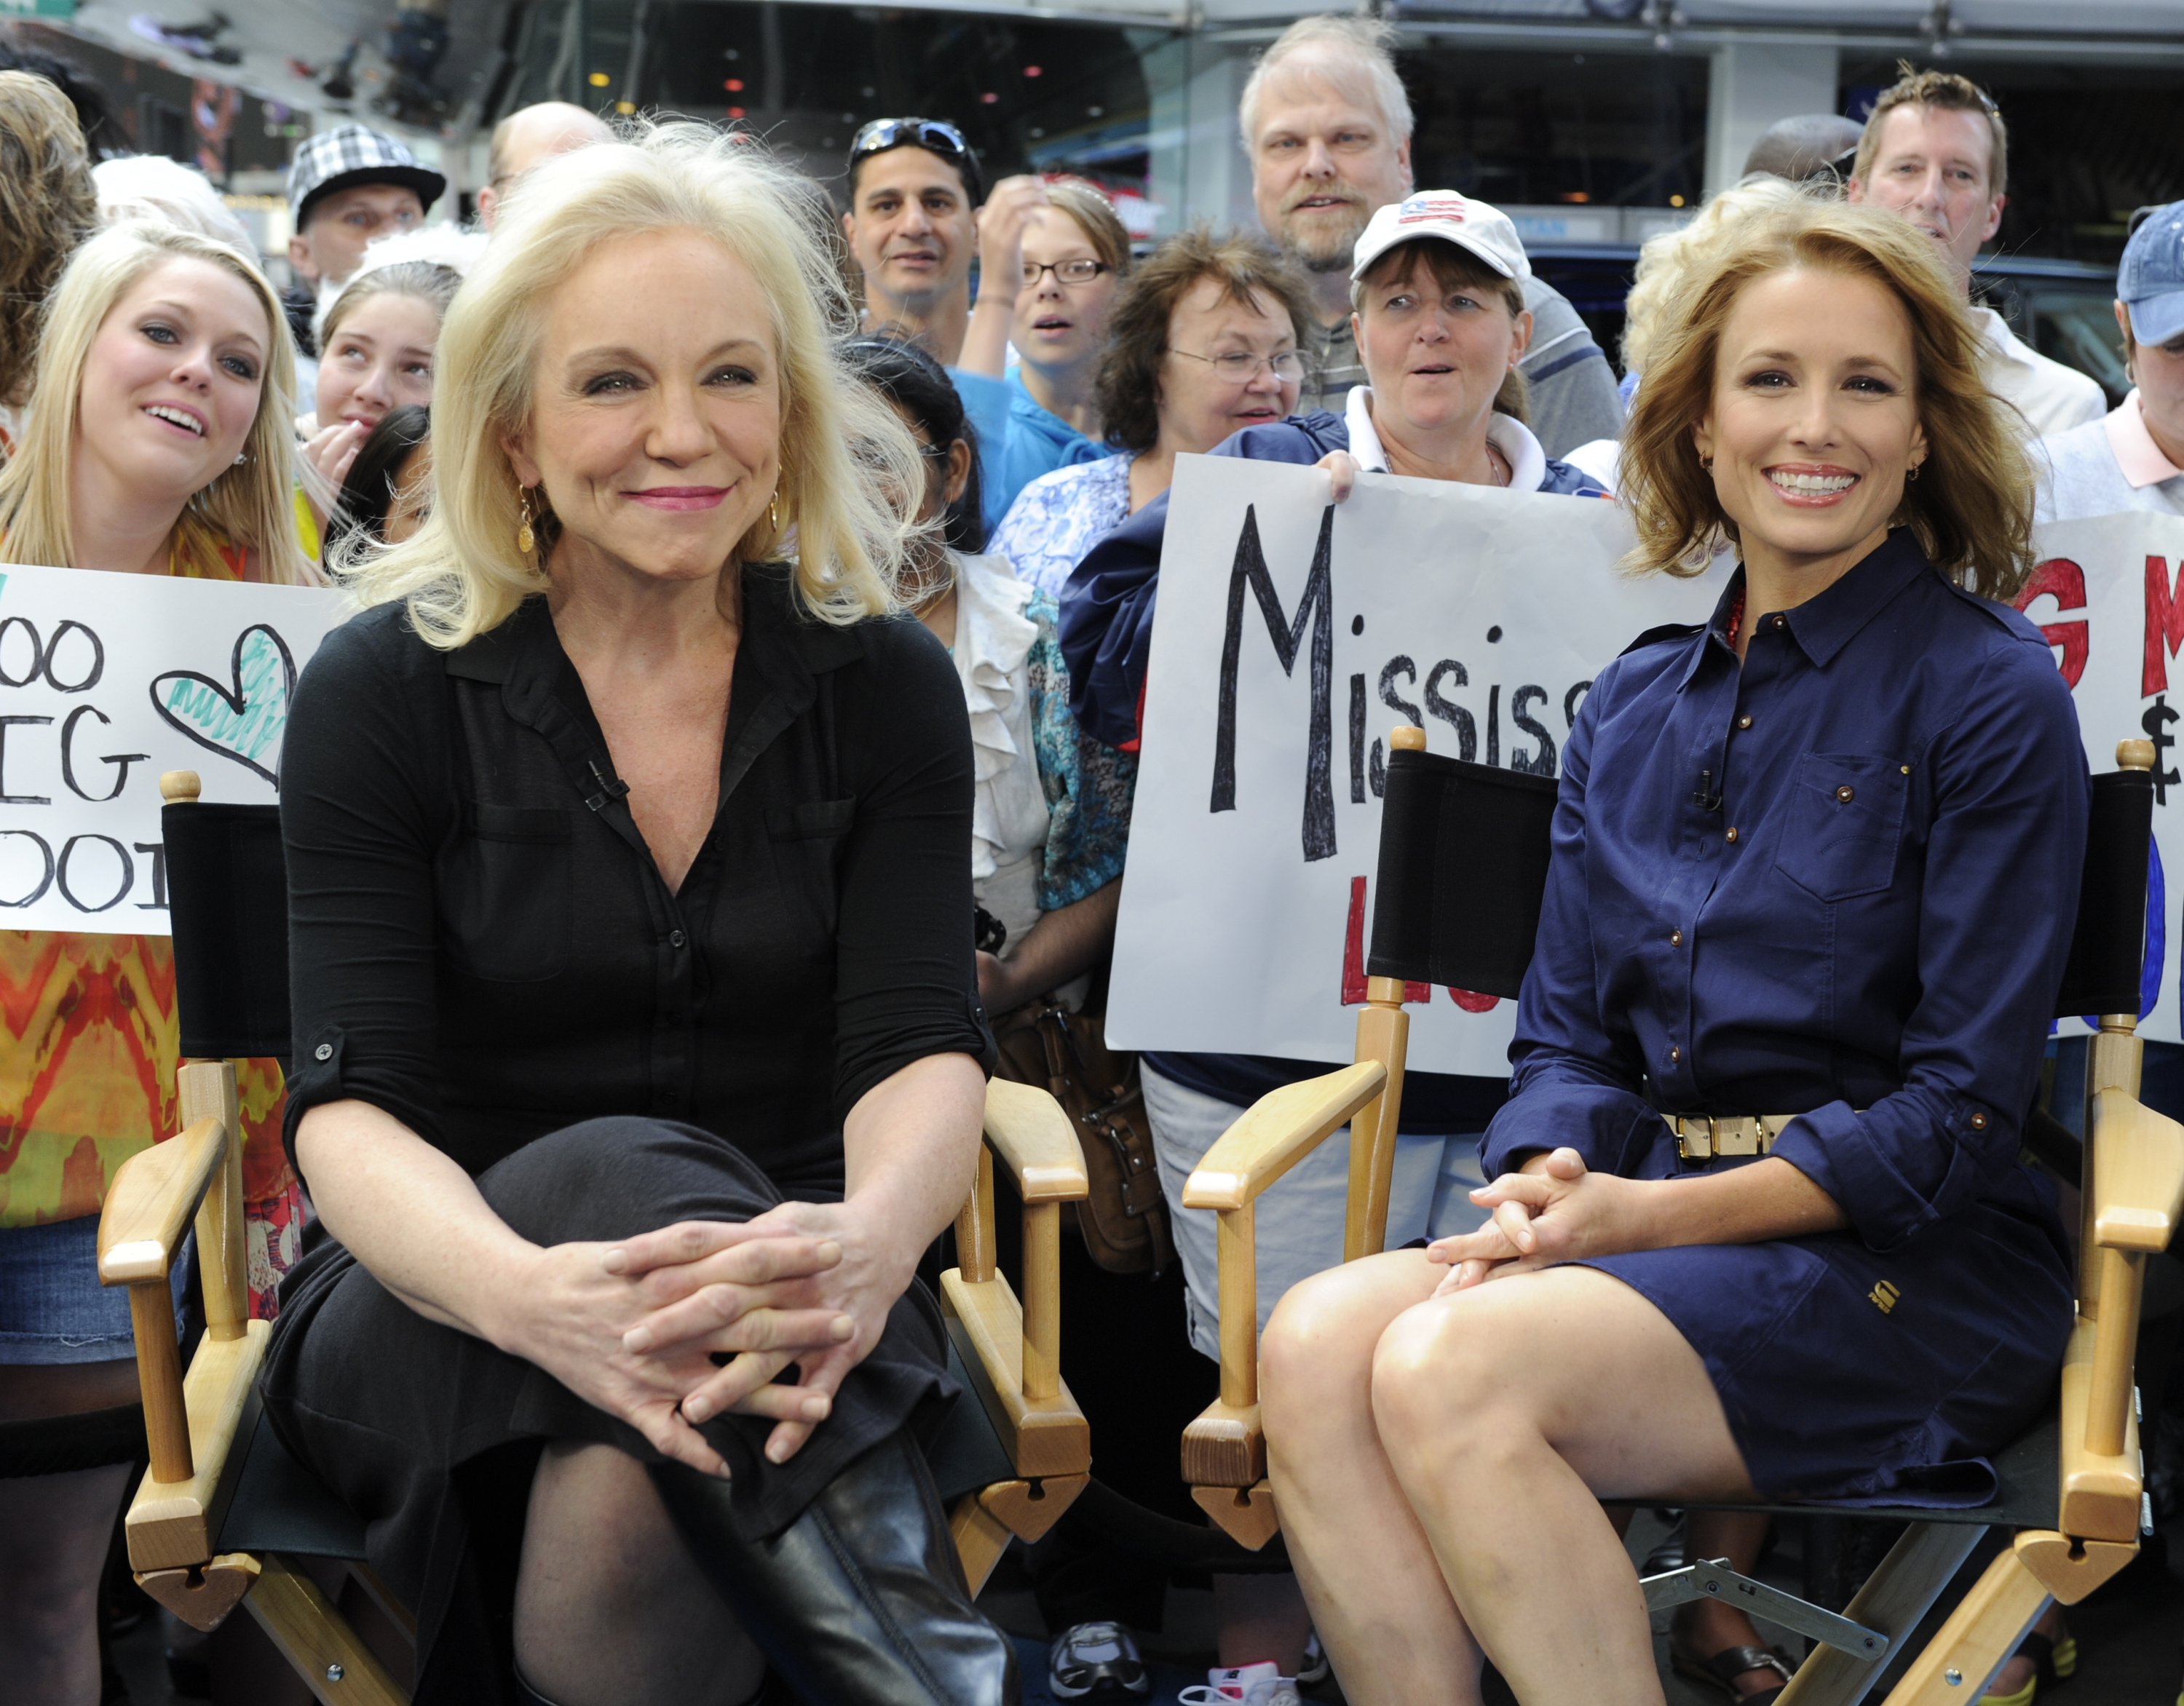 Brett Butler and Shawnee Smith promoting their new show, "Anger Management," on "Good Morning America," on June 26, 2012 | Source: Getty Images